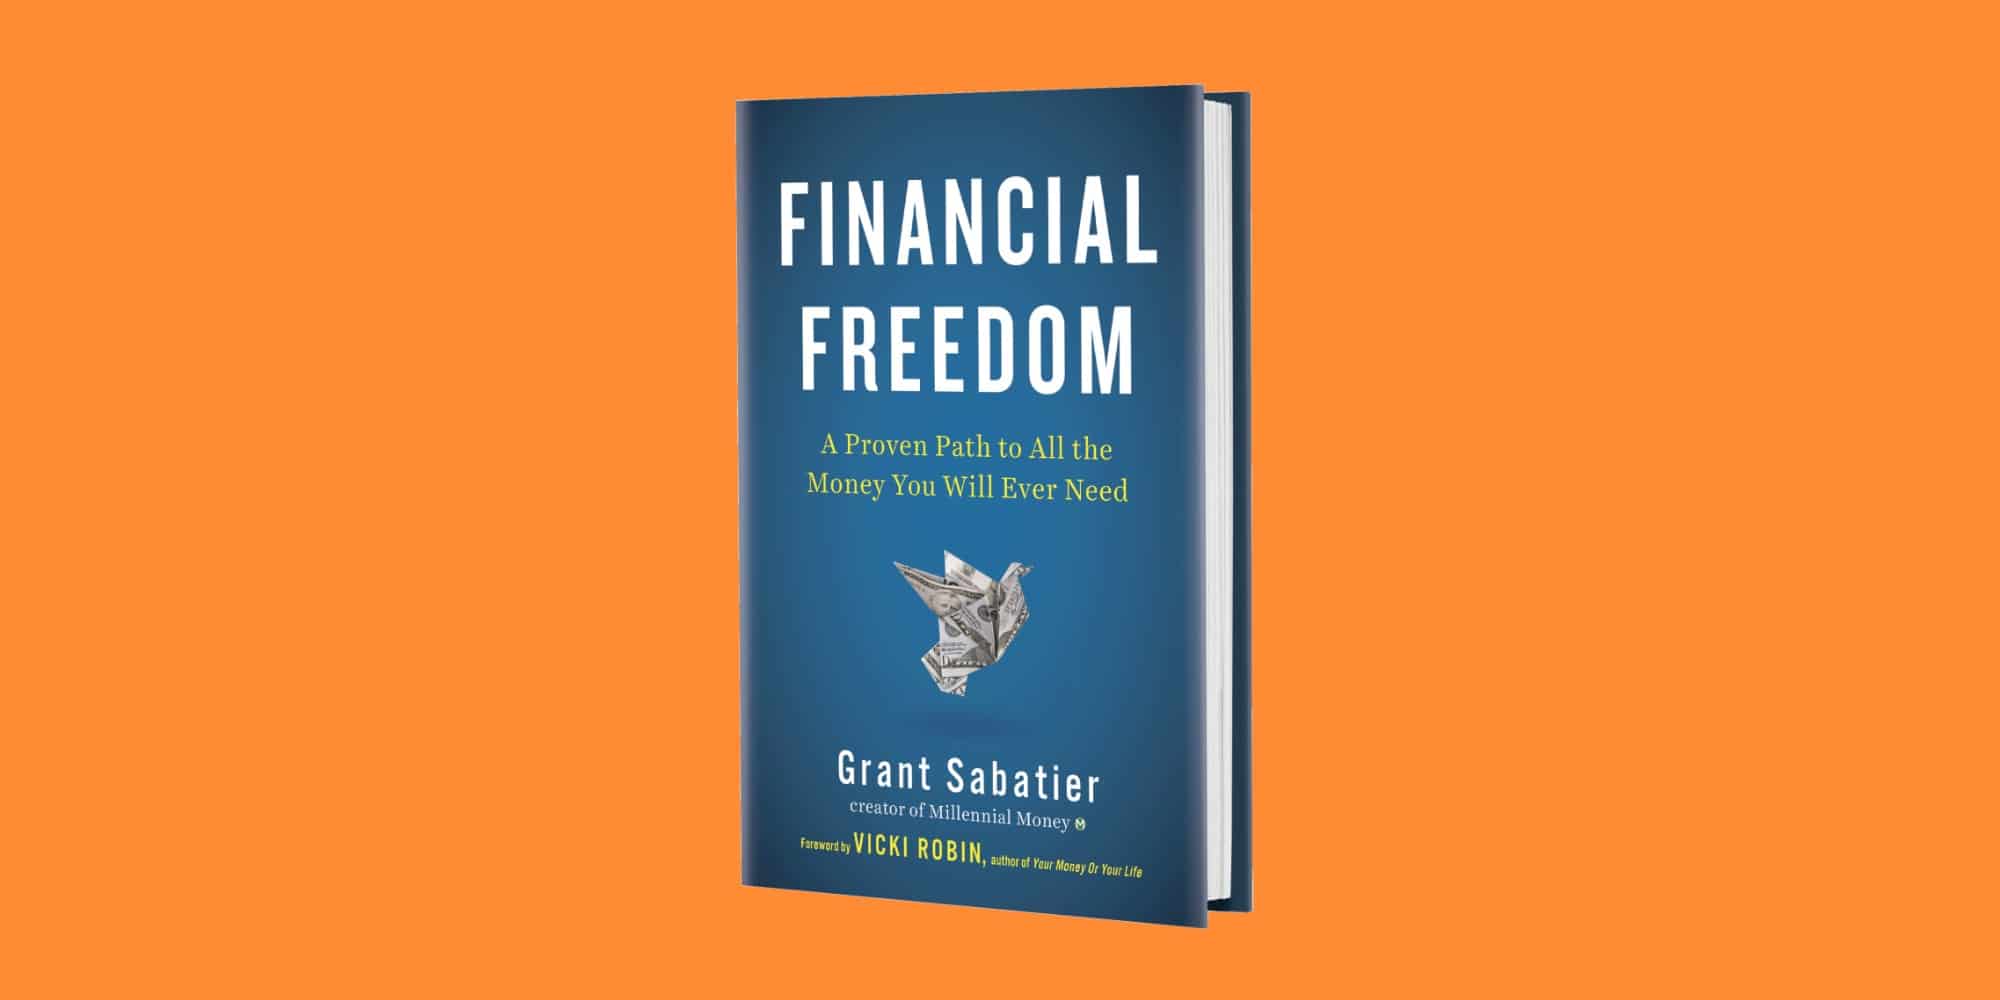 "Financial Freedom" by Grant Sabatier - Book Review